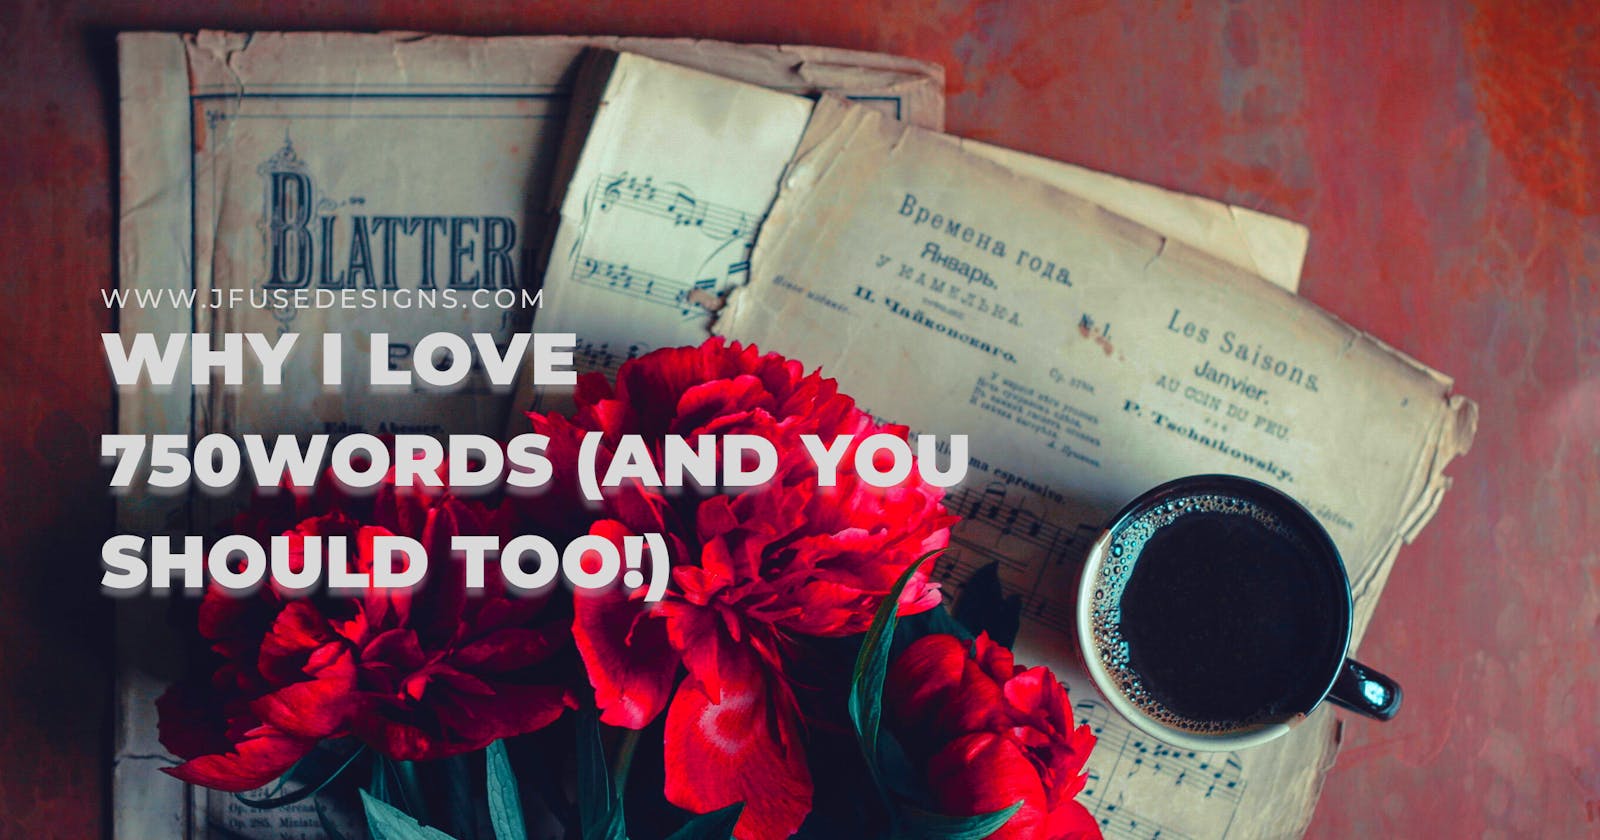 Why I love 750words (and you should too!)